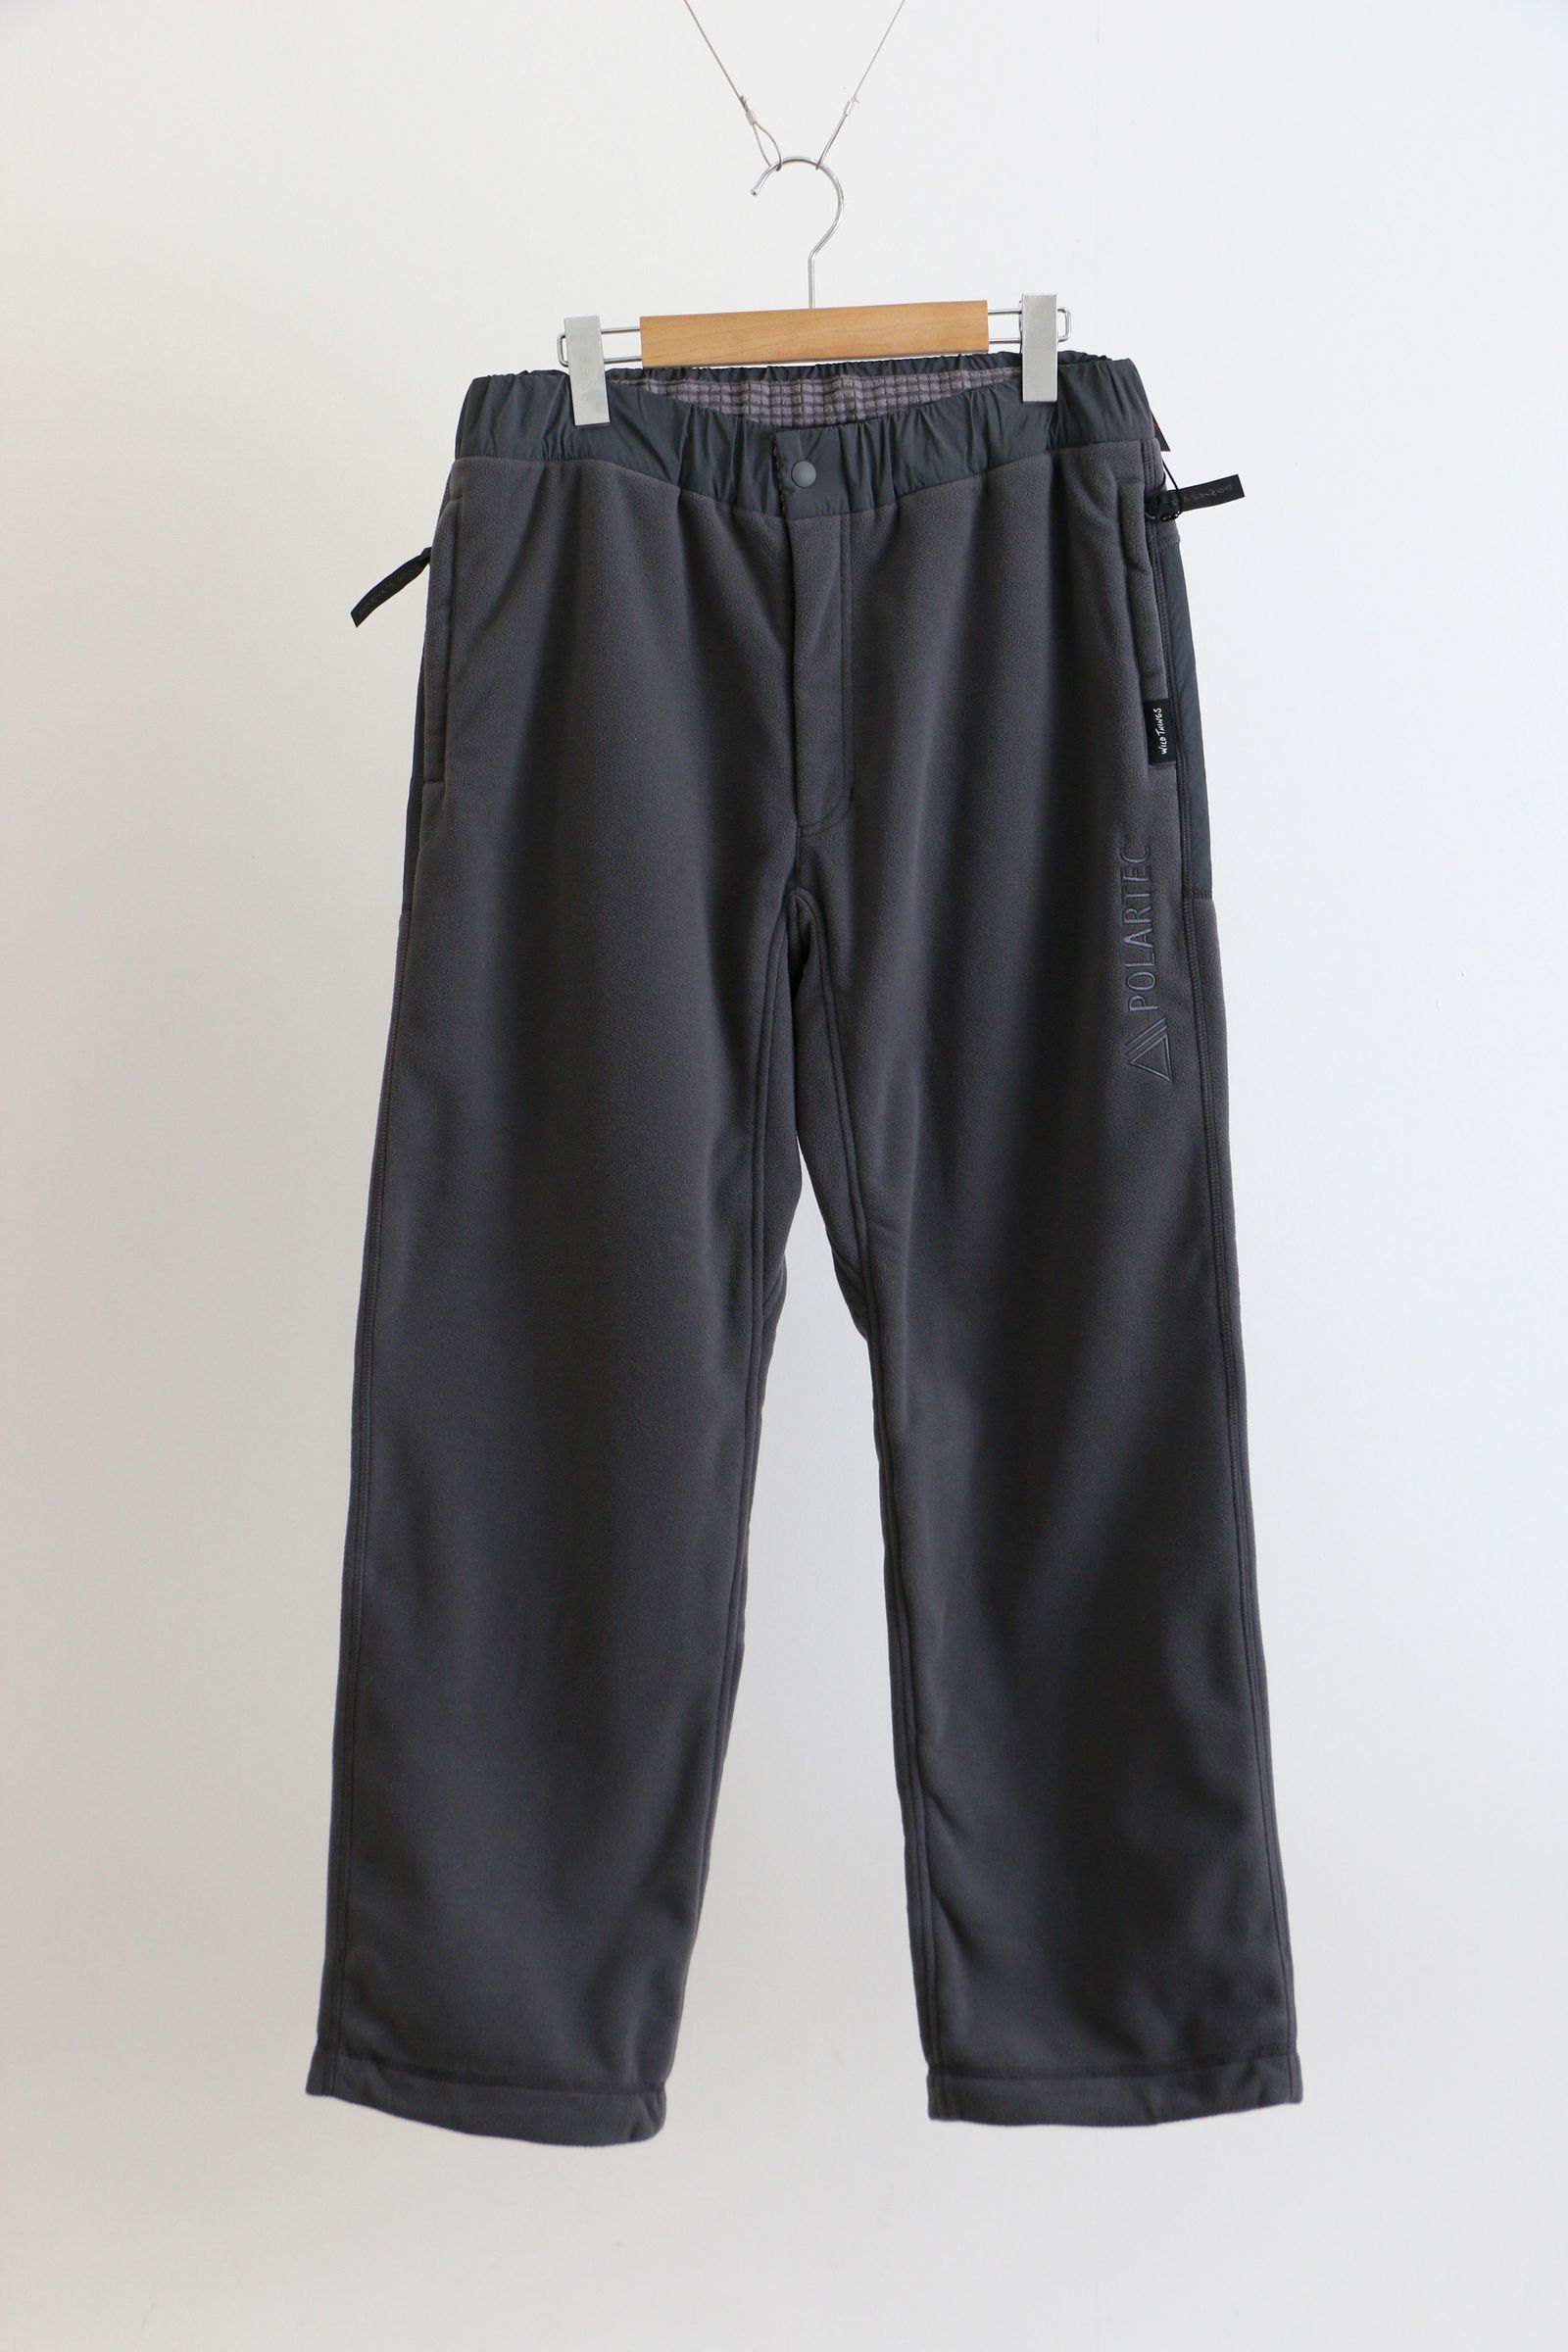 WILD THINGS - POLARTEC Wind Pro COMFY PANTS / BLACK / ポーラテック ...